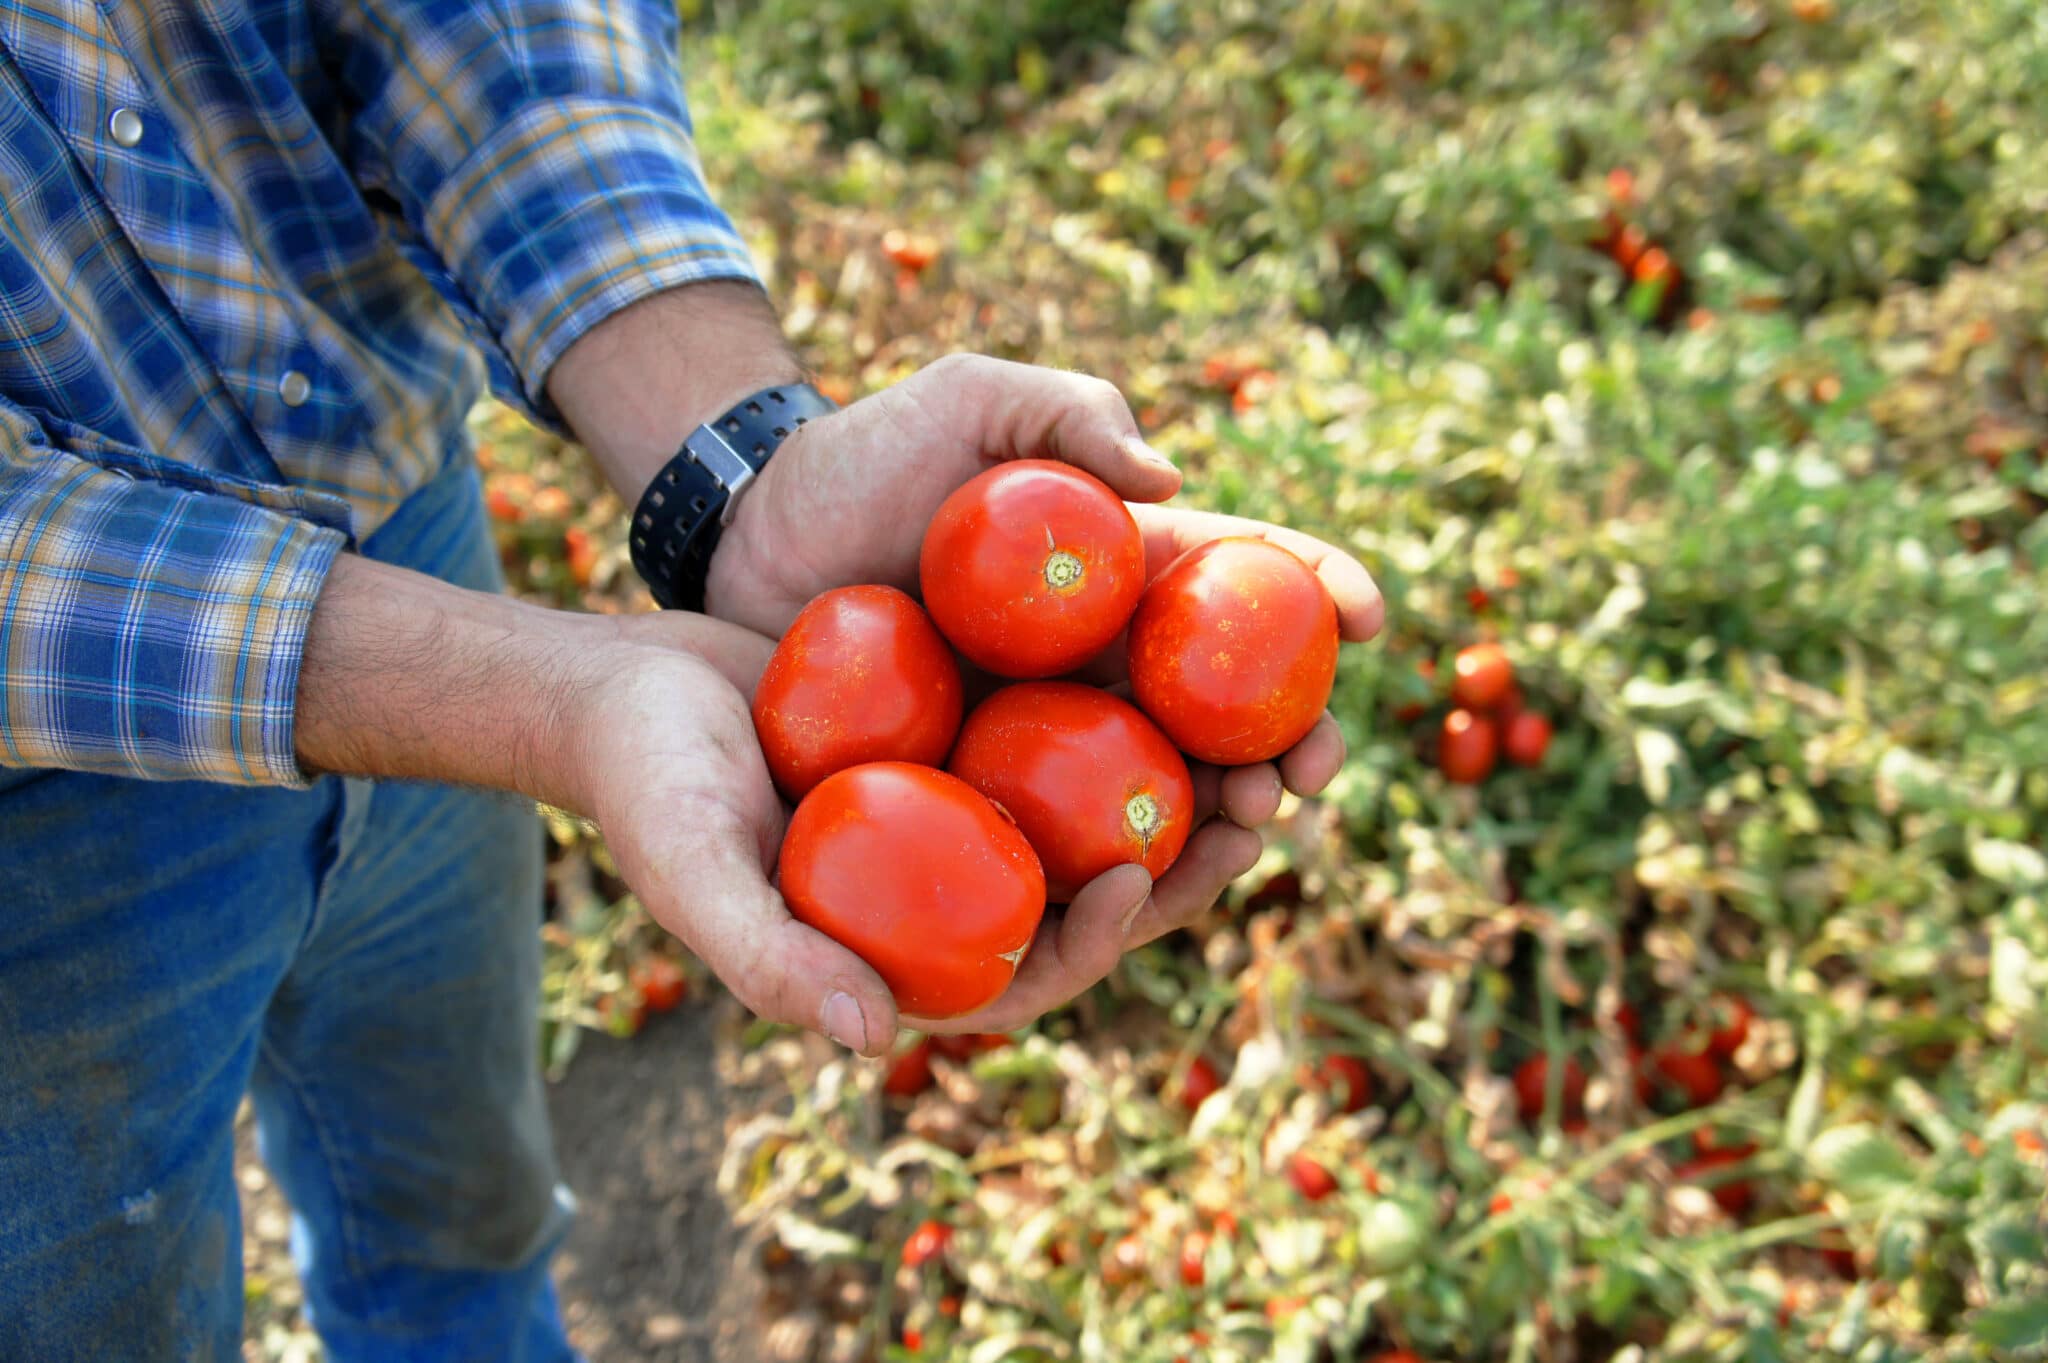 Sam Meek holiday tomatoes being harvested from his field in Woodland, CA